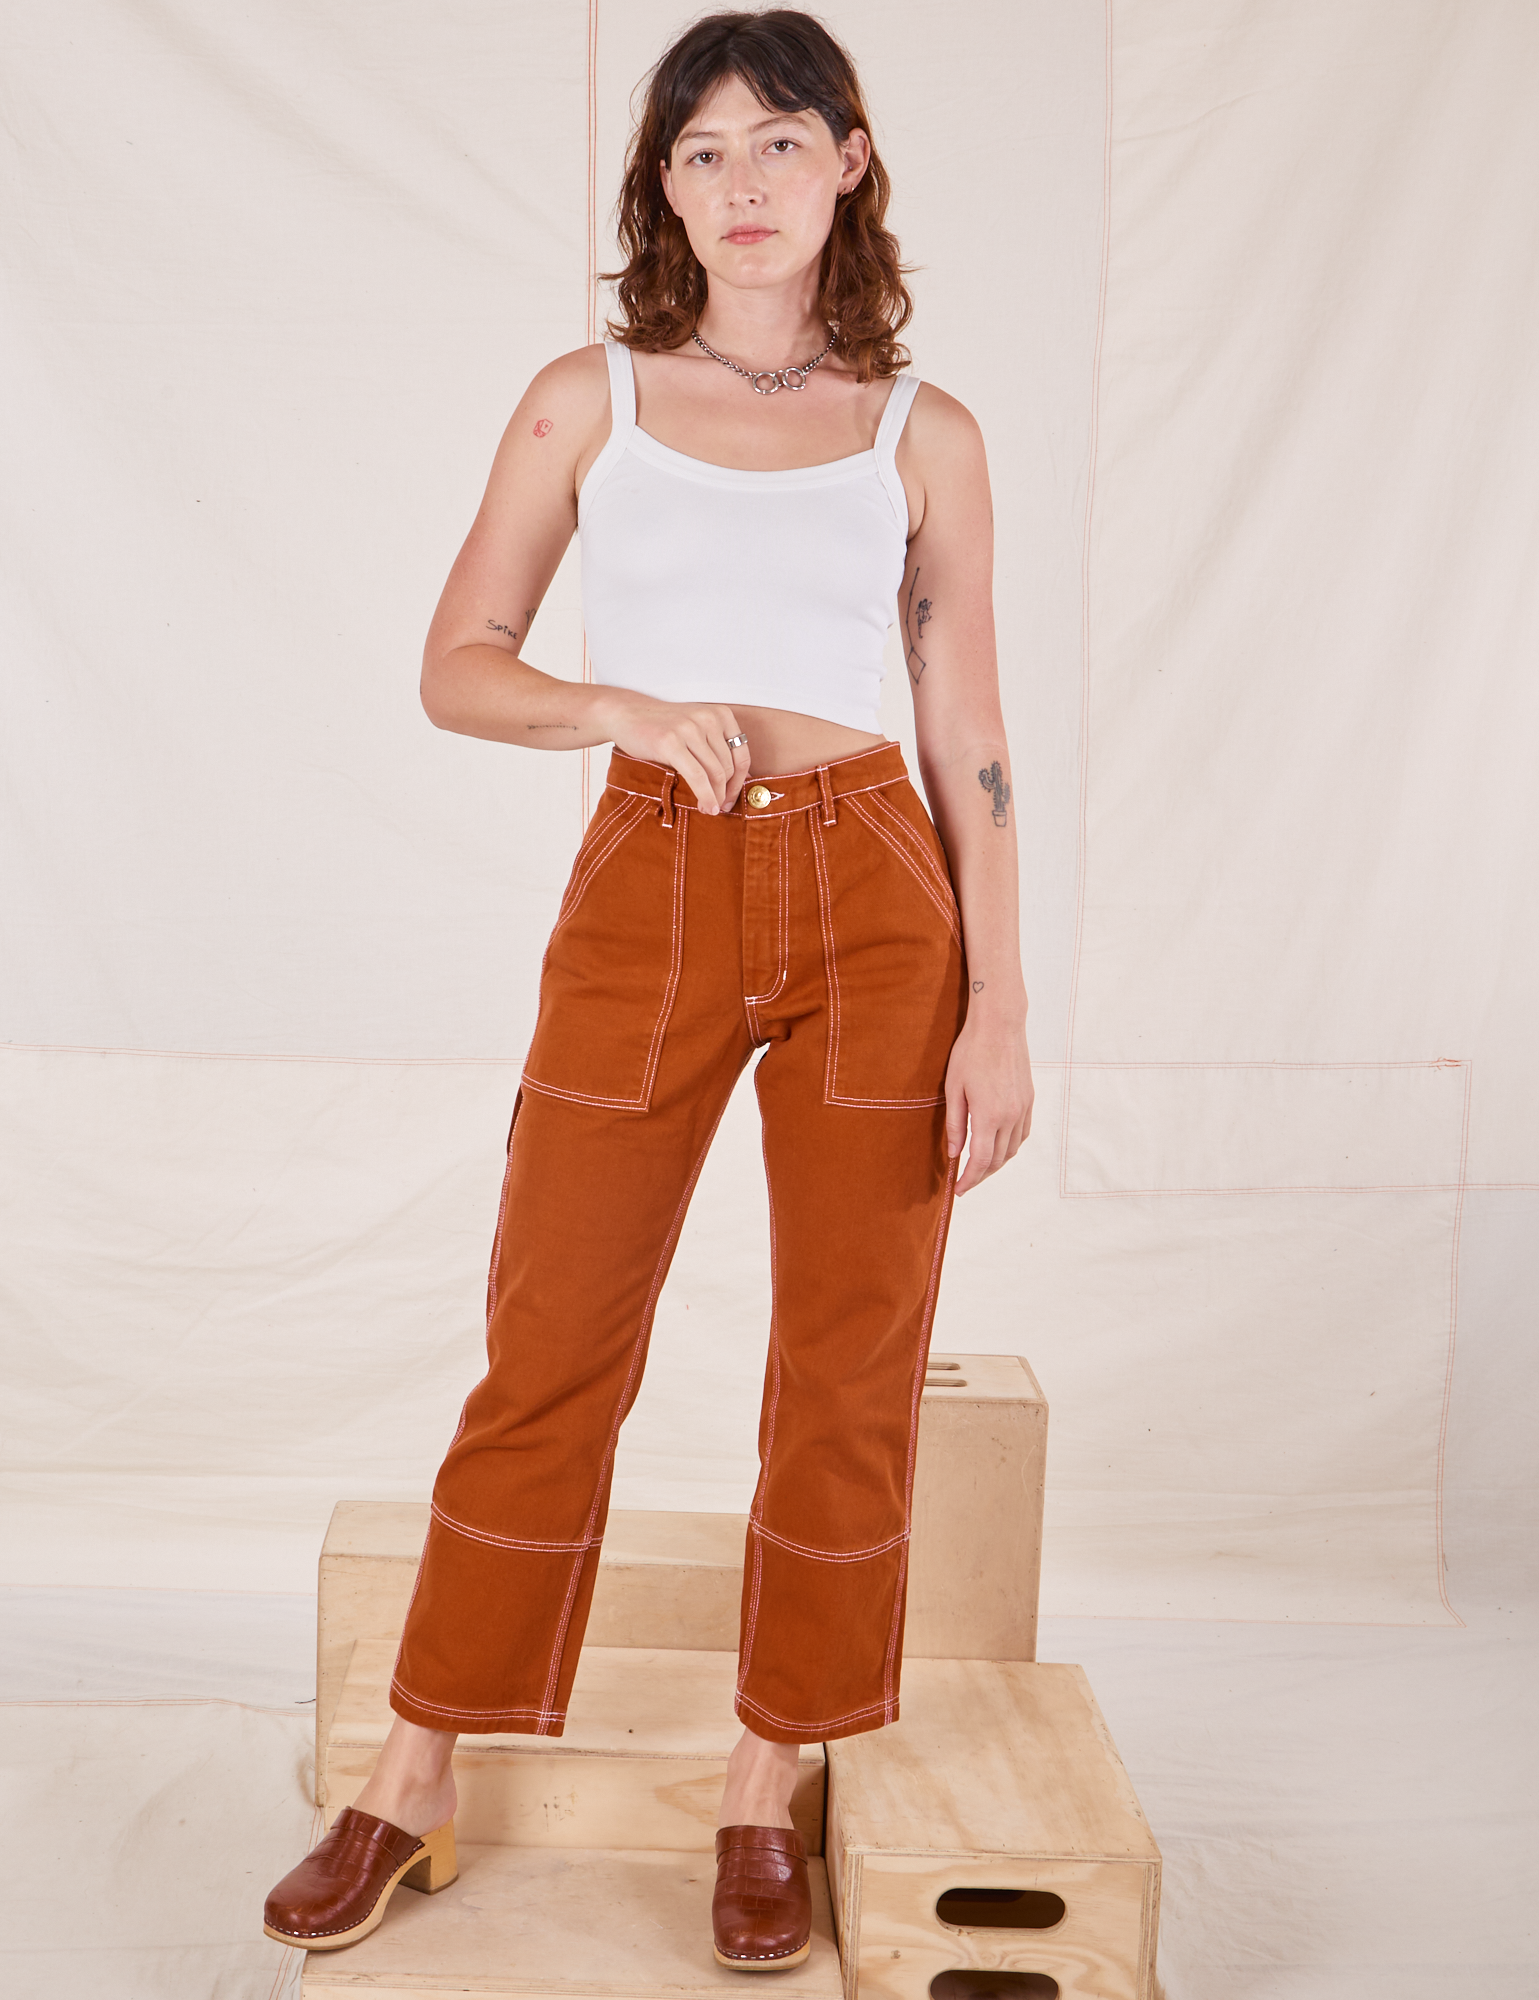 Alex is 5'8" and wearing XXS Carpenter Jeans in Burnt Terracotta paired with vintage off-white Cropped Cami